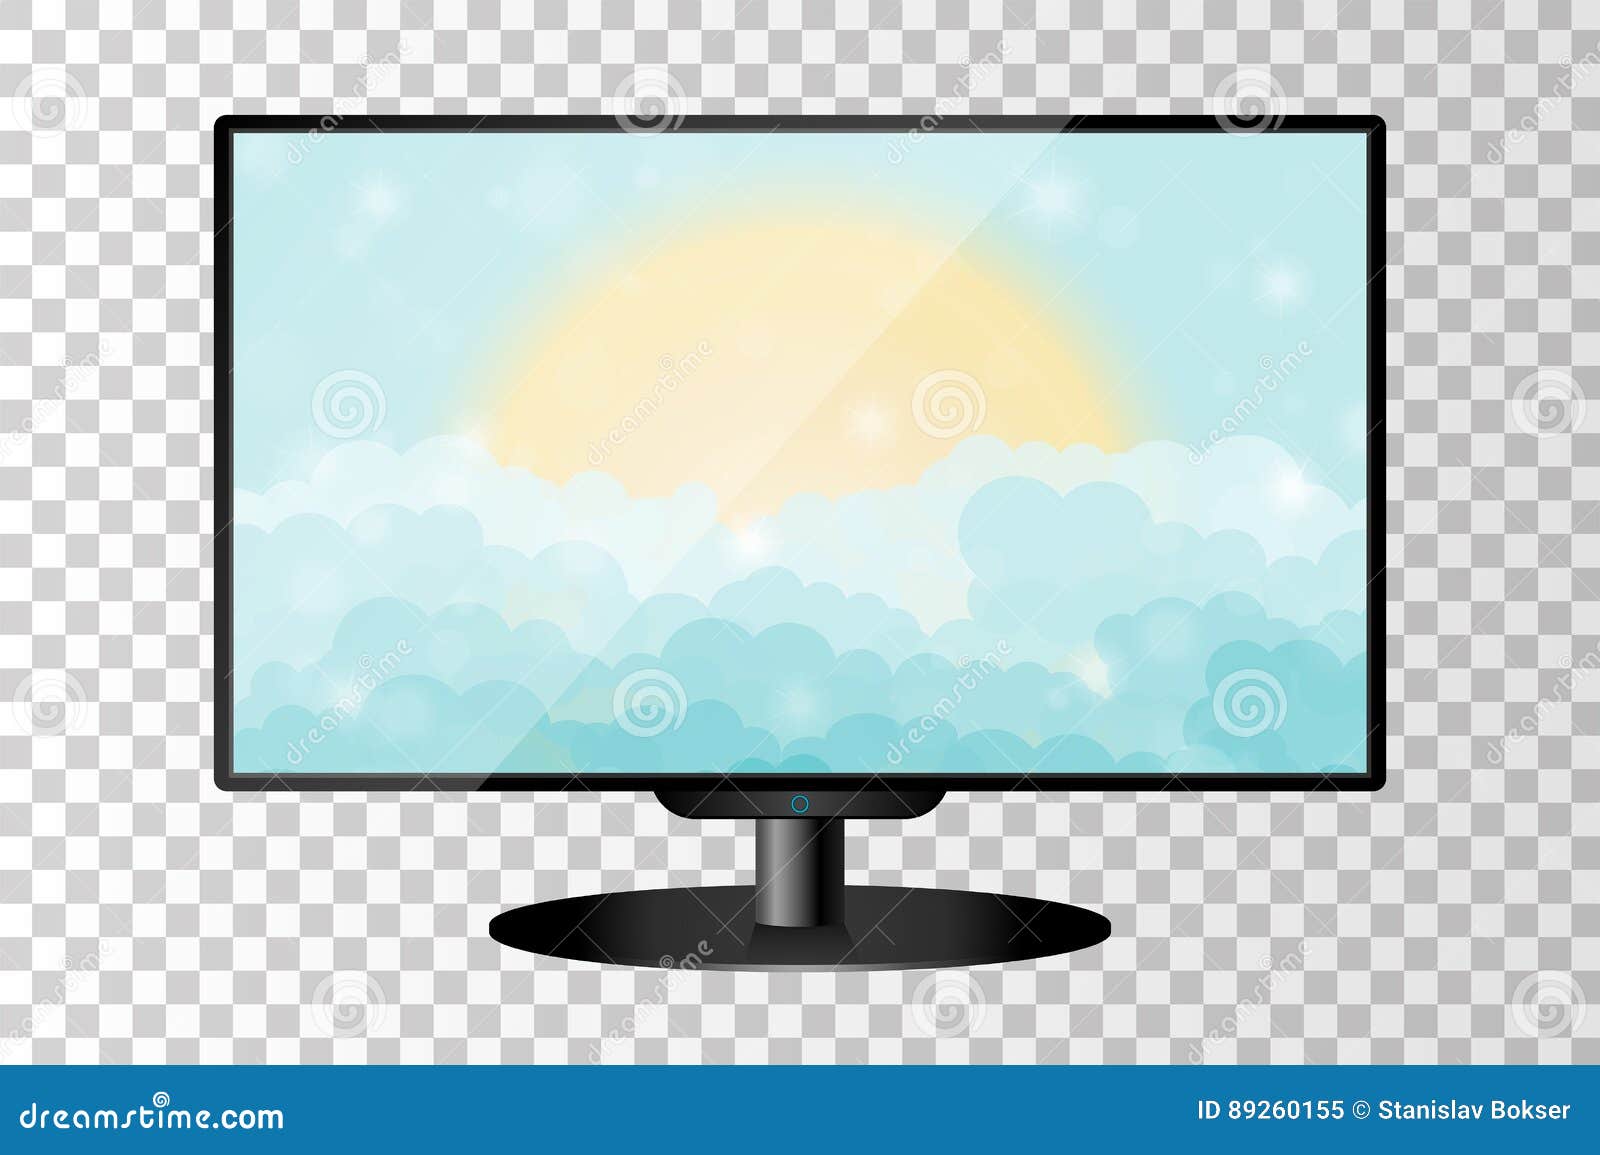 Realistic Modern TV Monitor Isolated. Cartoon Blue Shining Cloudy Sky with  Sun Stock Vector - Illustration of beautiful, modern: 89260155